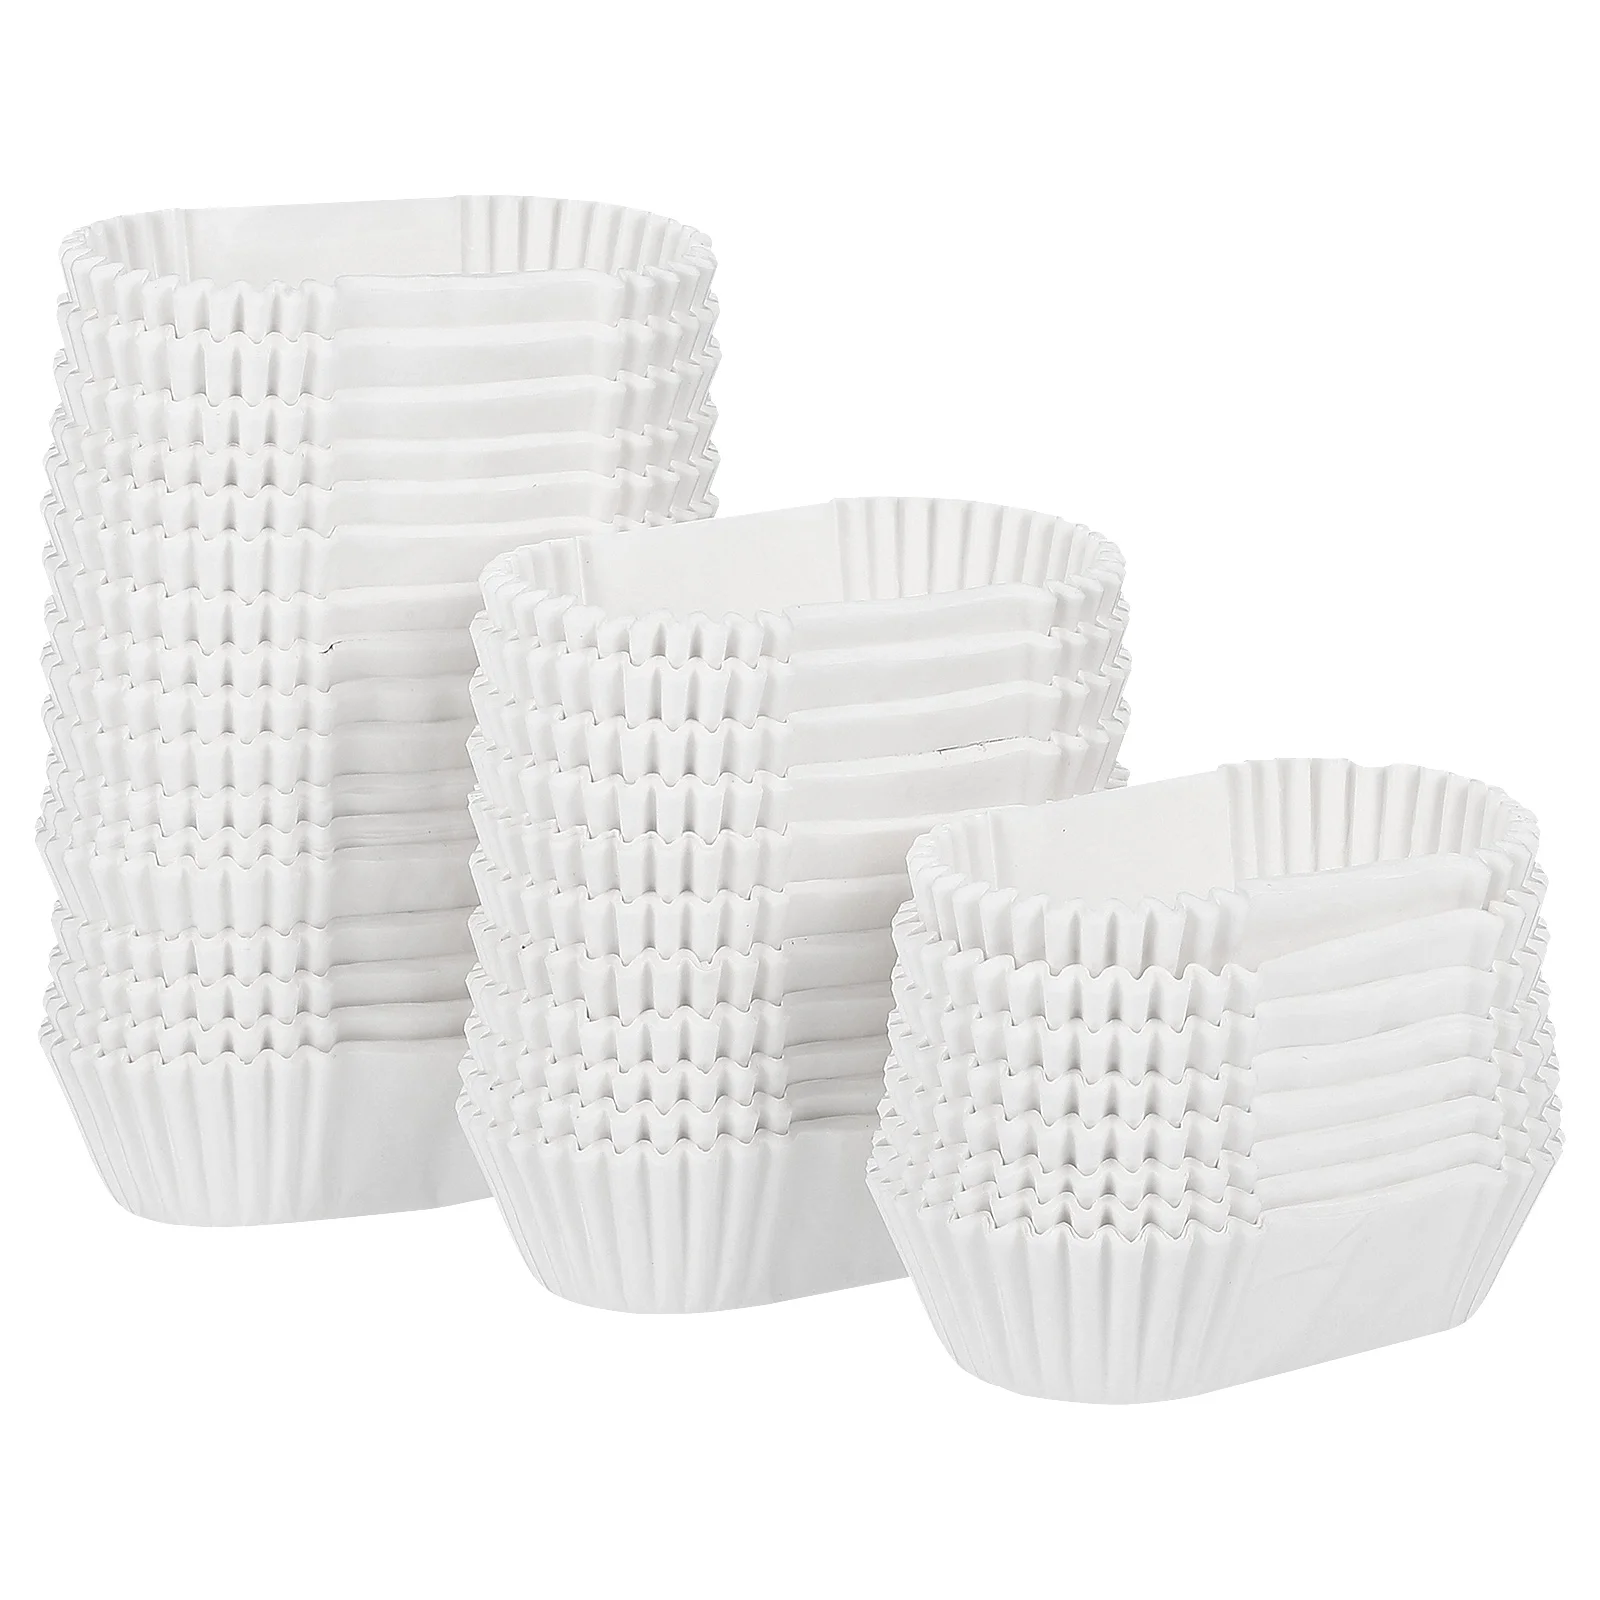 

1000 Pcs Loaf Pan Paper Baking Cups Disposable Dessert Bowls Cake Holders Bread Small Cupcake Liners Pans